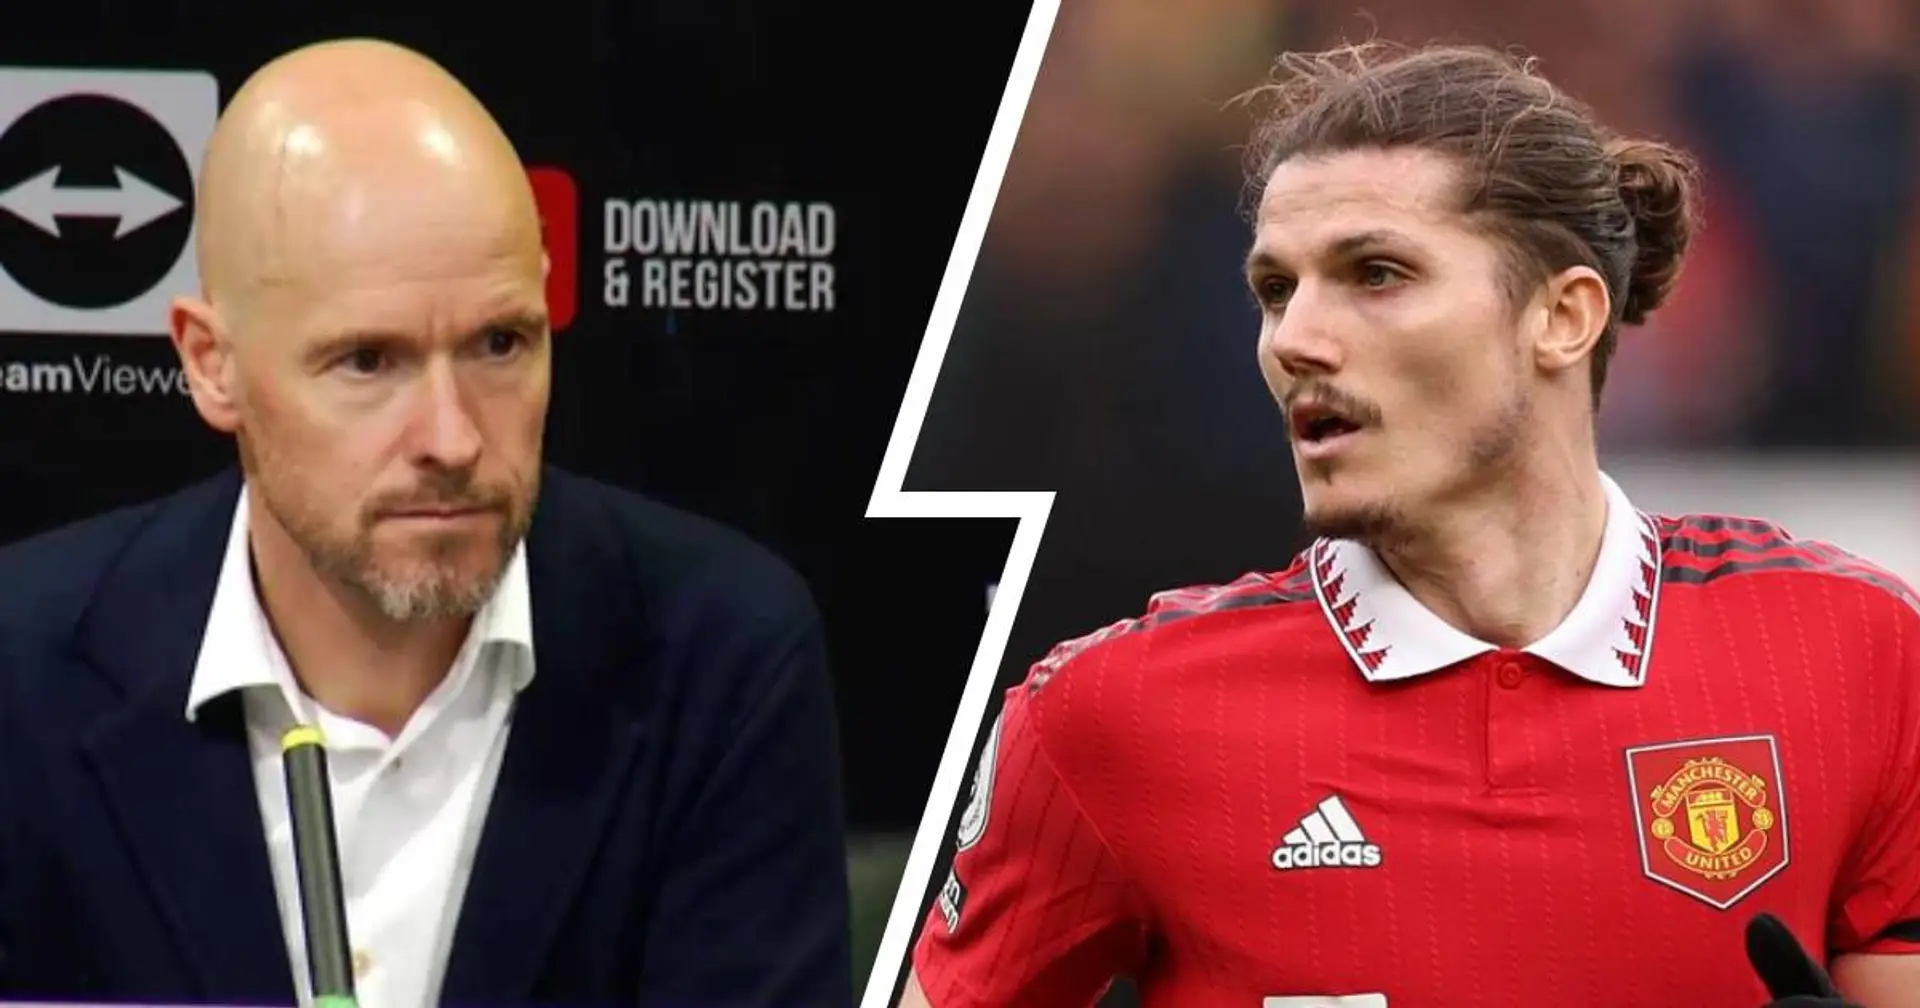 Ten Hag refuses to share information about Man United's transfer business